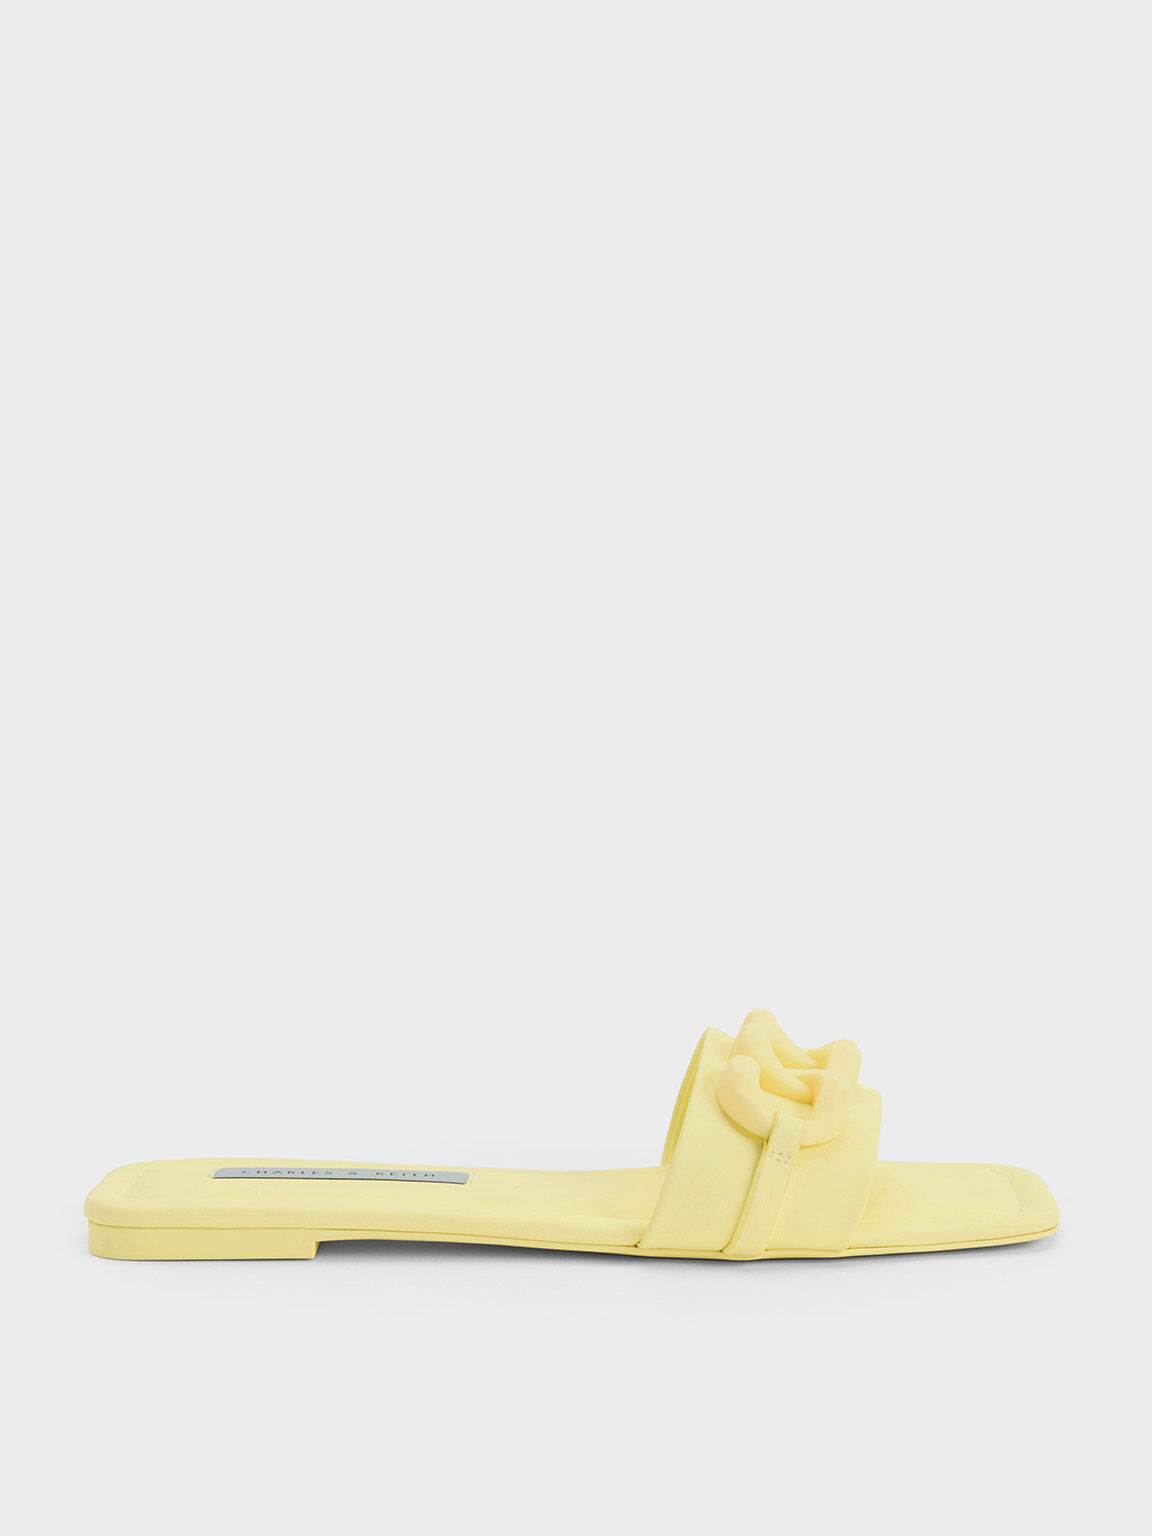 Chunky Chain-Link Slide Sandals, Yellow, hi-res